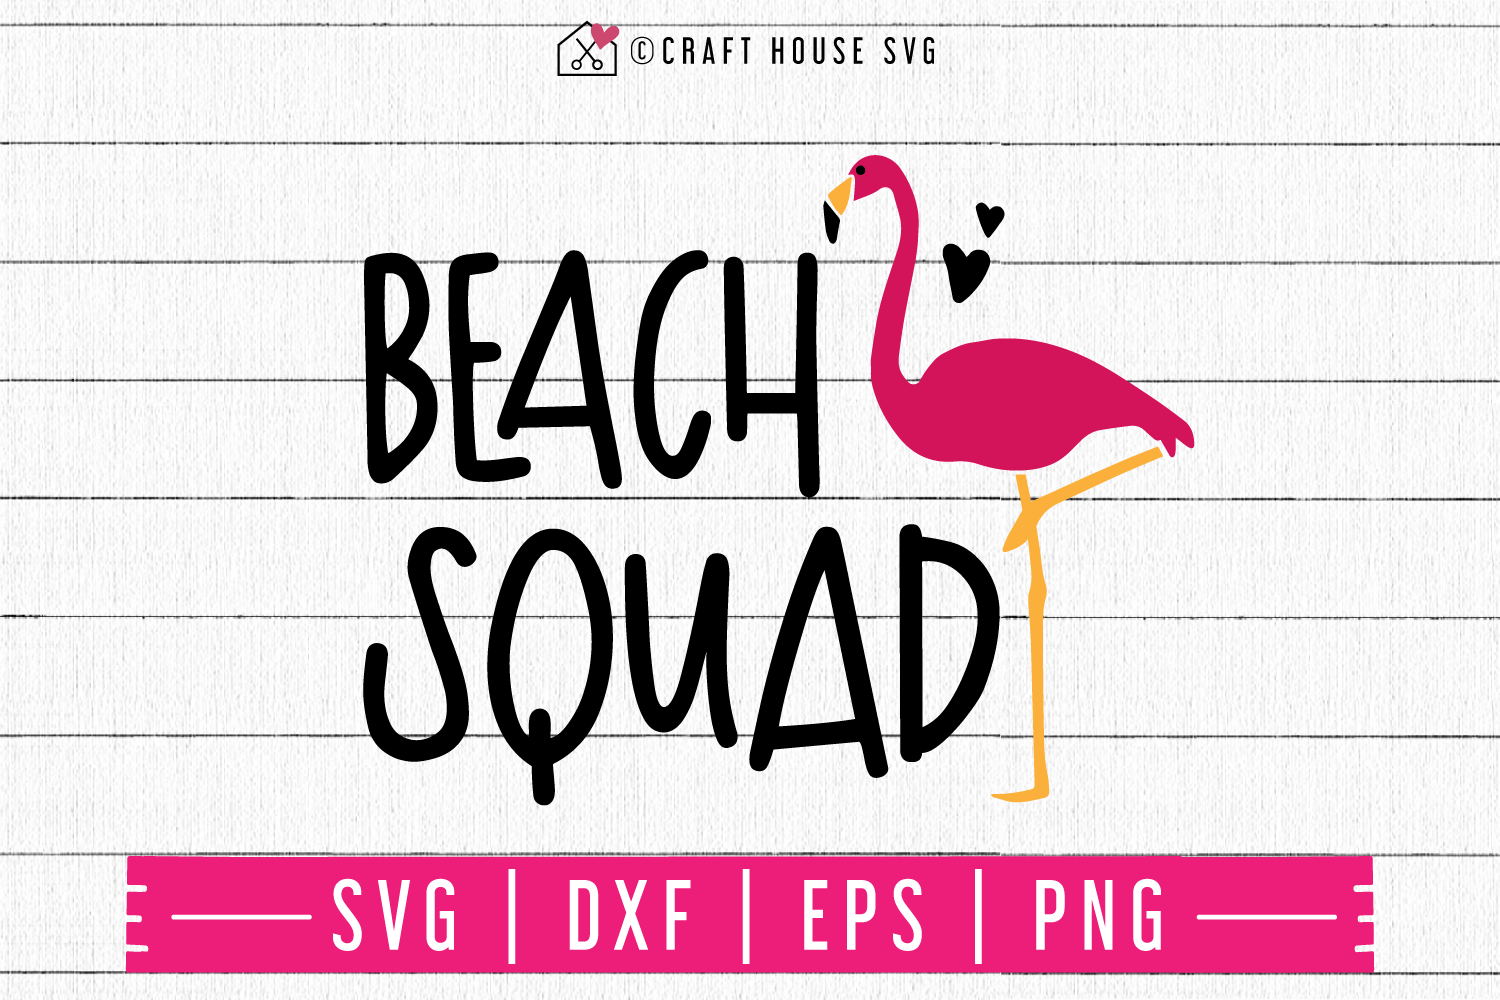 Beach squad SVG | M48F | A Summer SVG cut file Craft House SVG - SVG files for Cricut and Silhouette